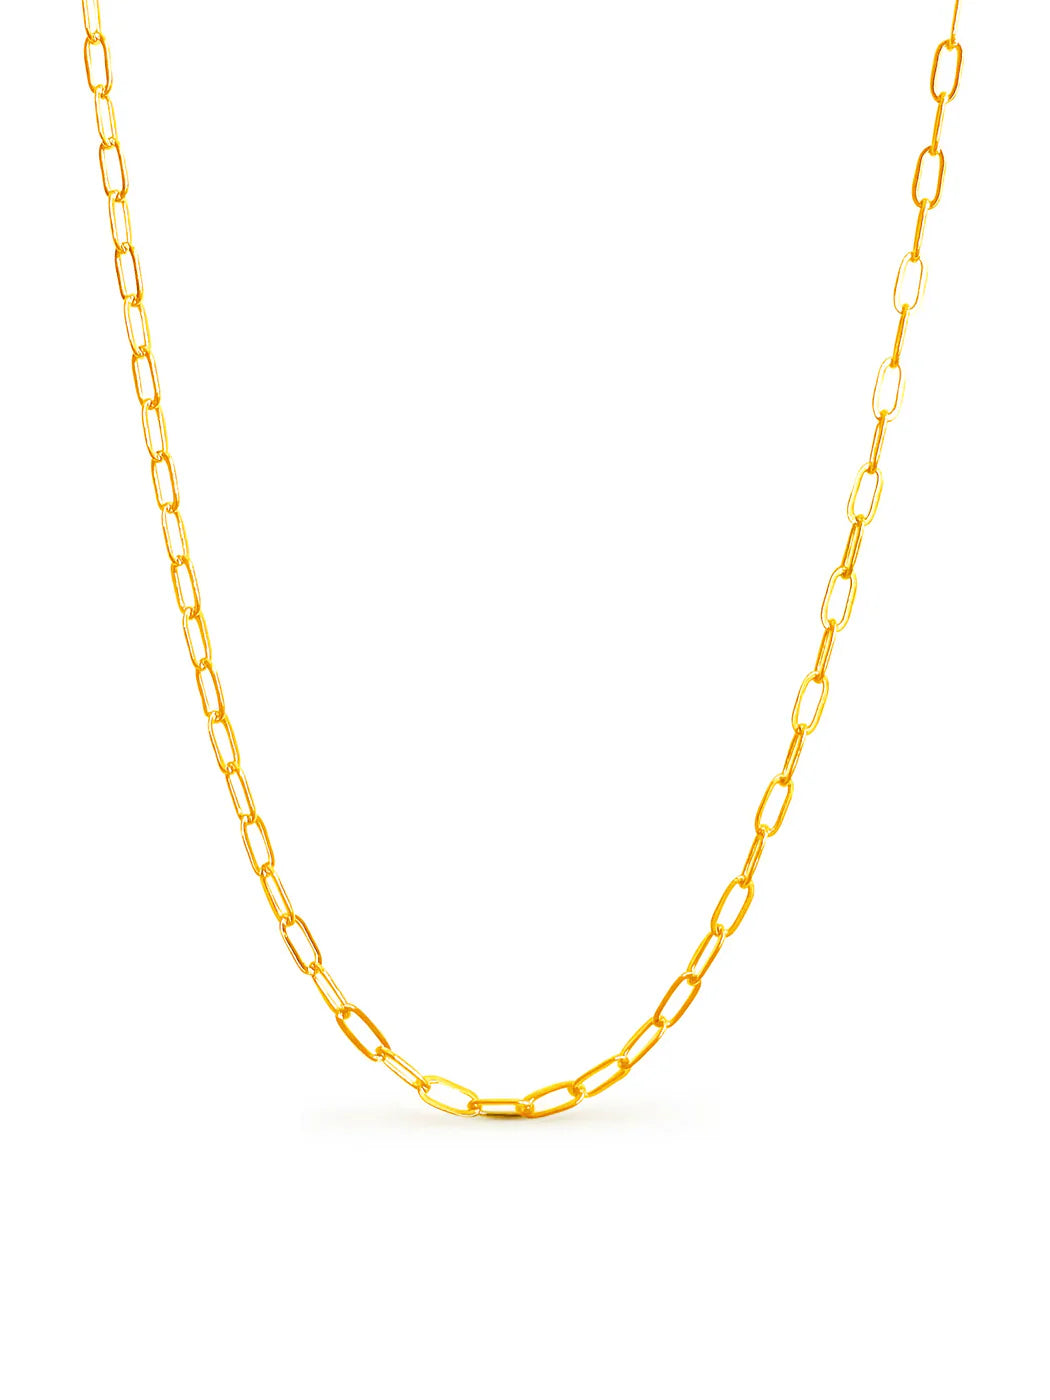 Laura Oval Chain - Gold Plating